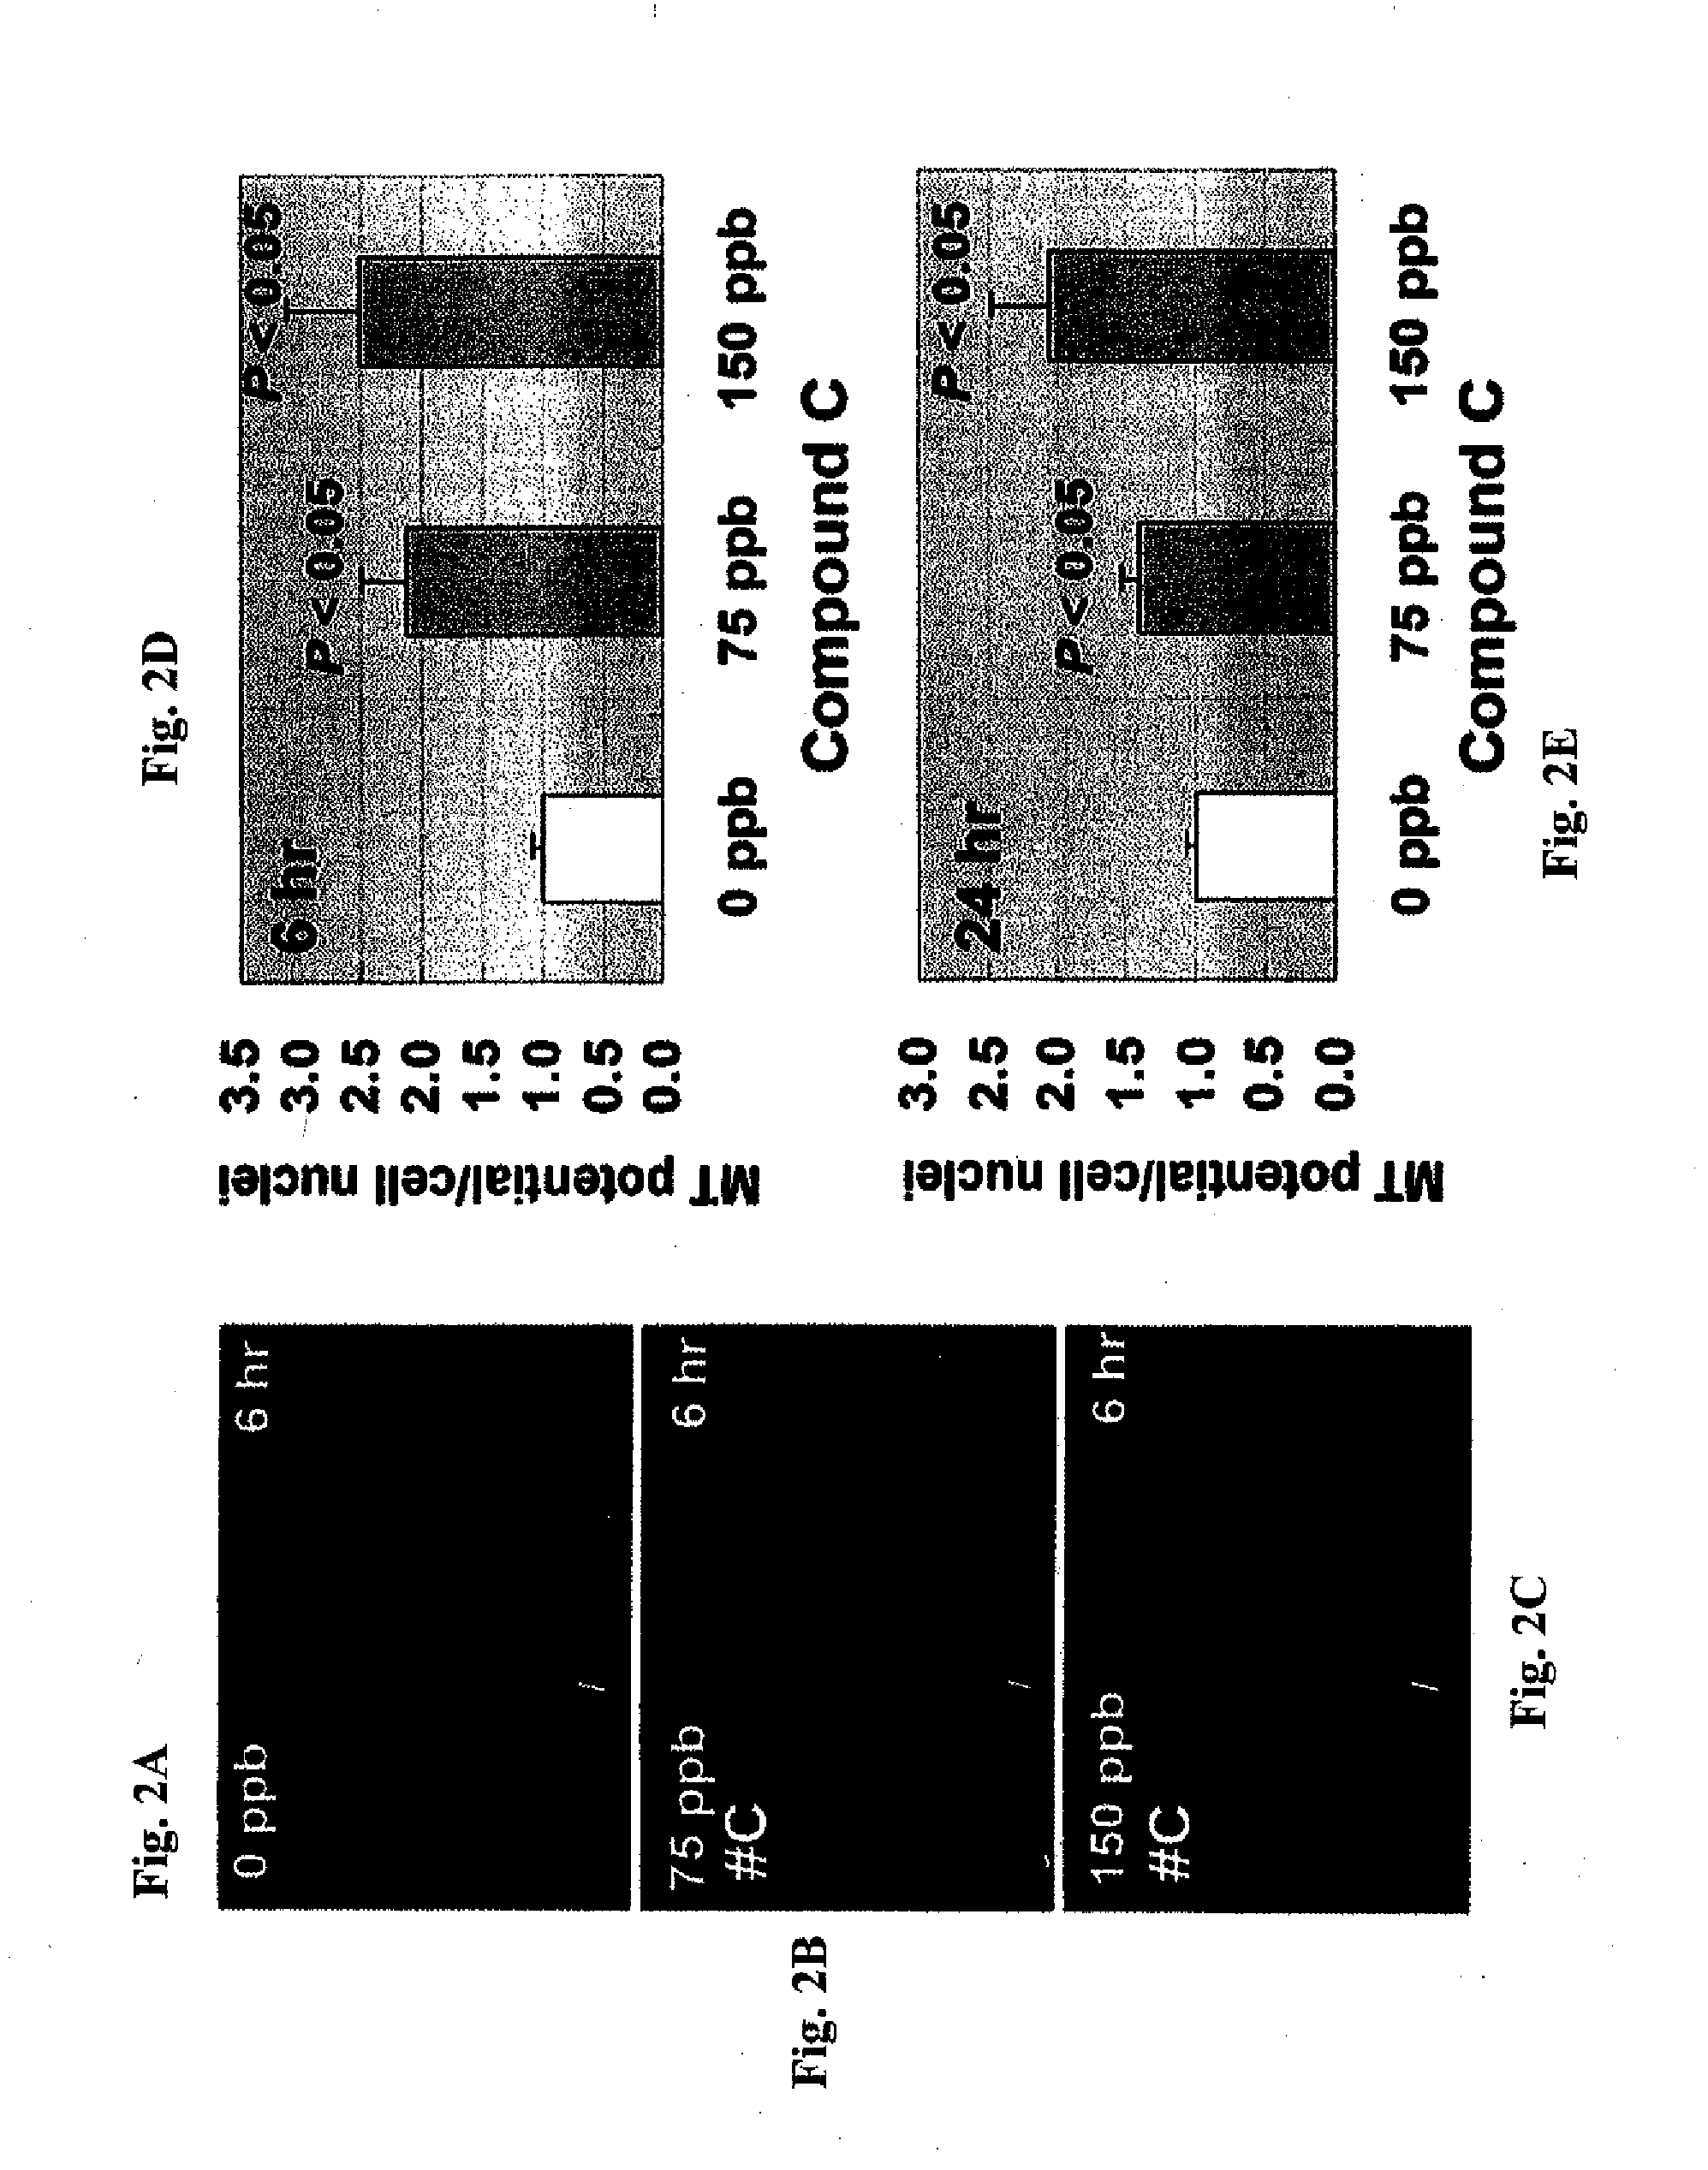 Compositions of selenoorganic compounds and methods of use thereof